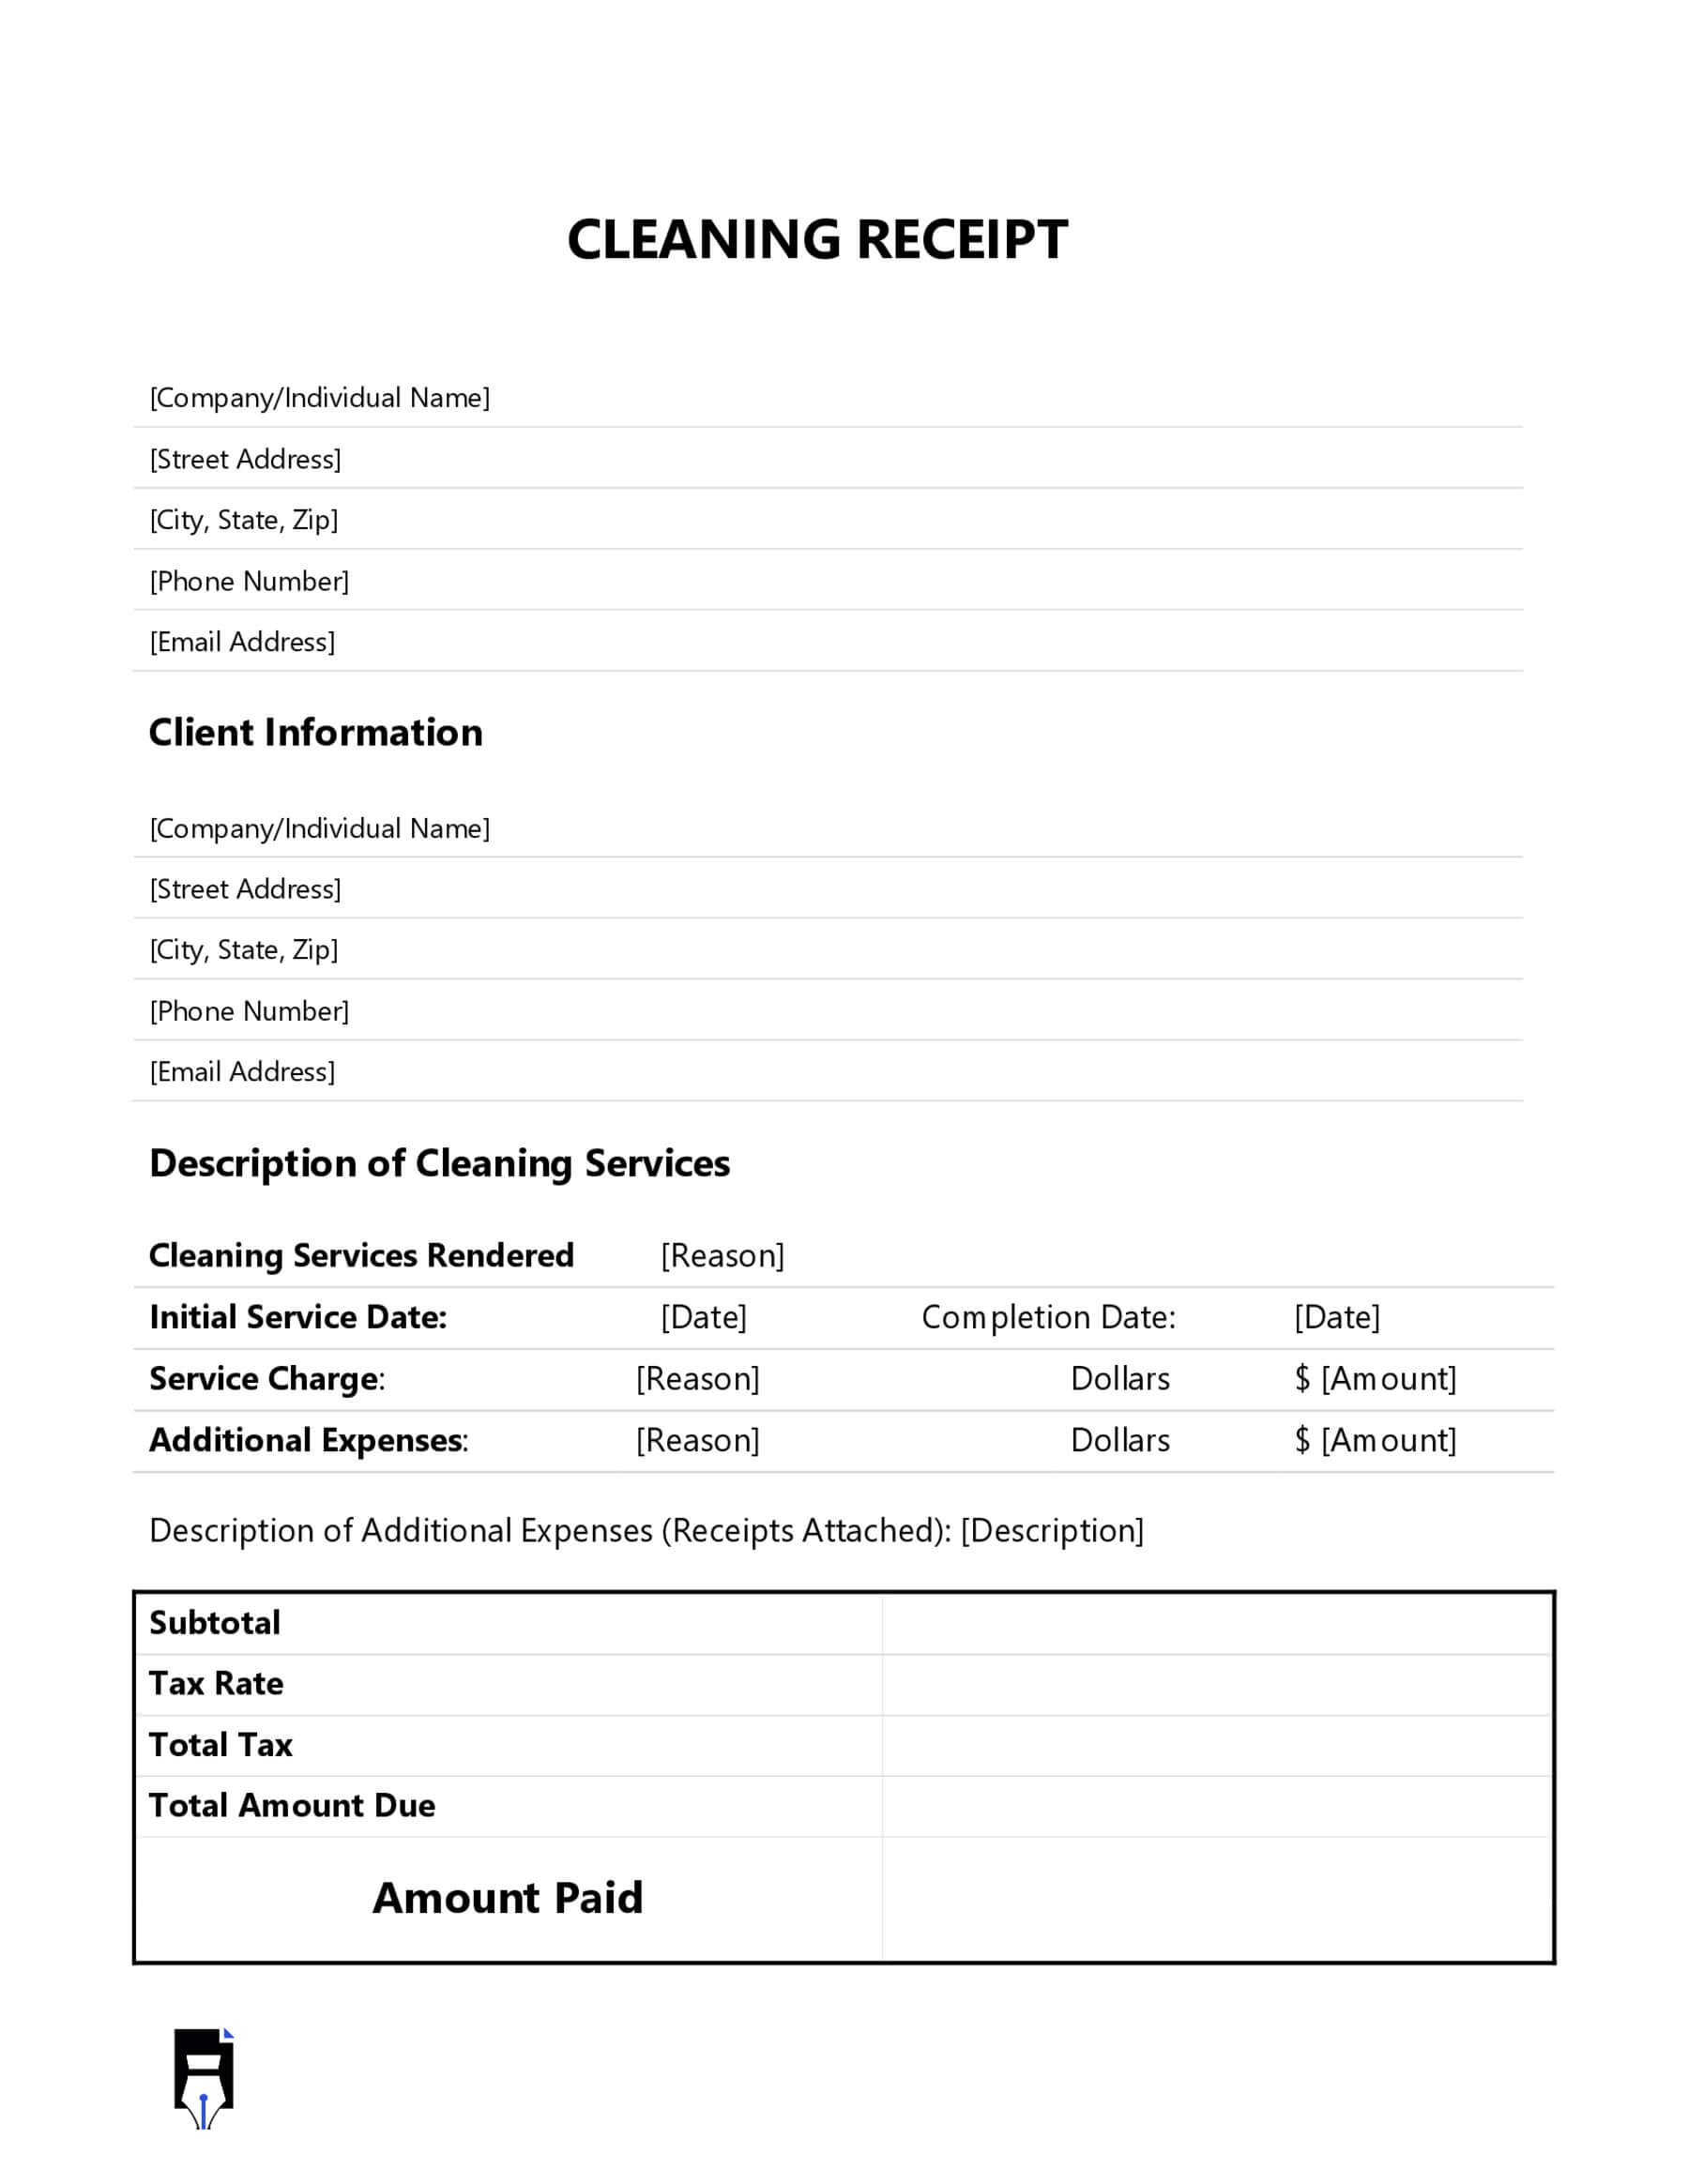 Free Sample Cleaning Receipt Template in Word